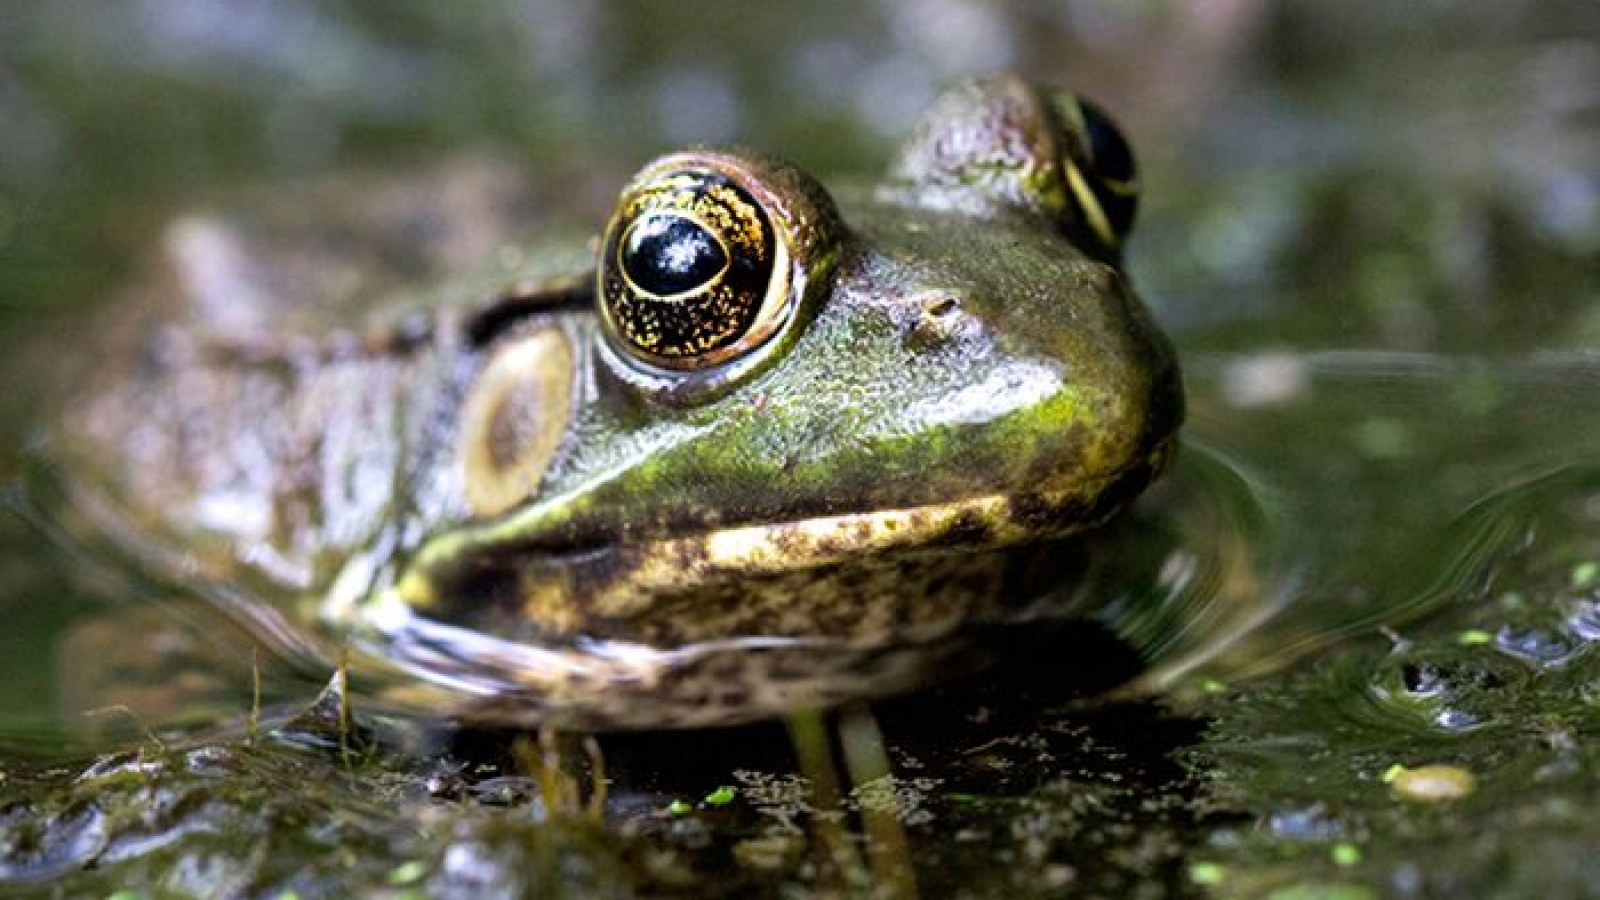 Male Frogs May Be Turning Female Thanks to Estrogen in Suburban Waste